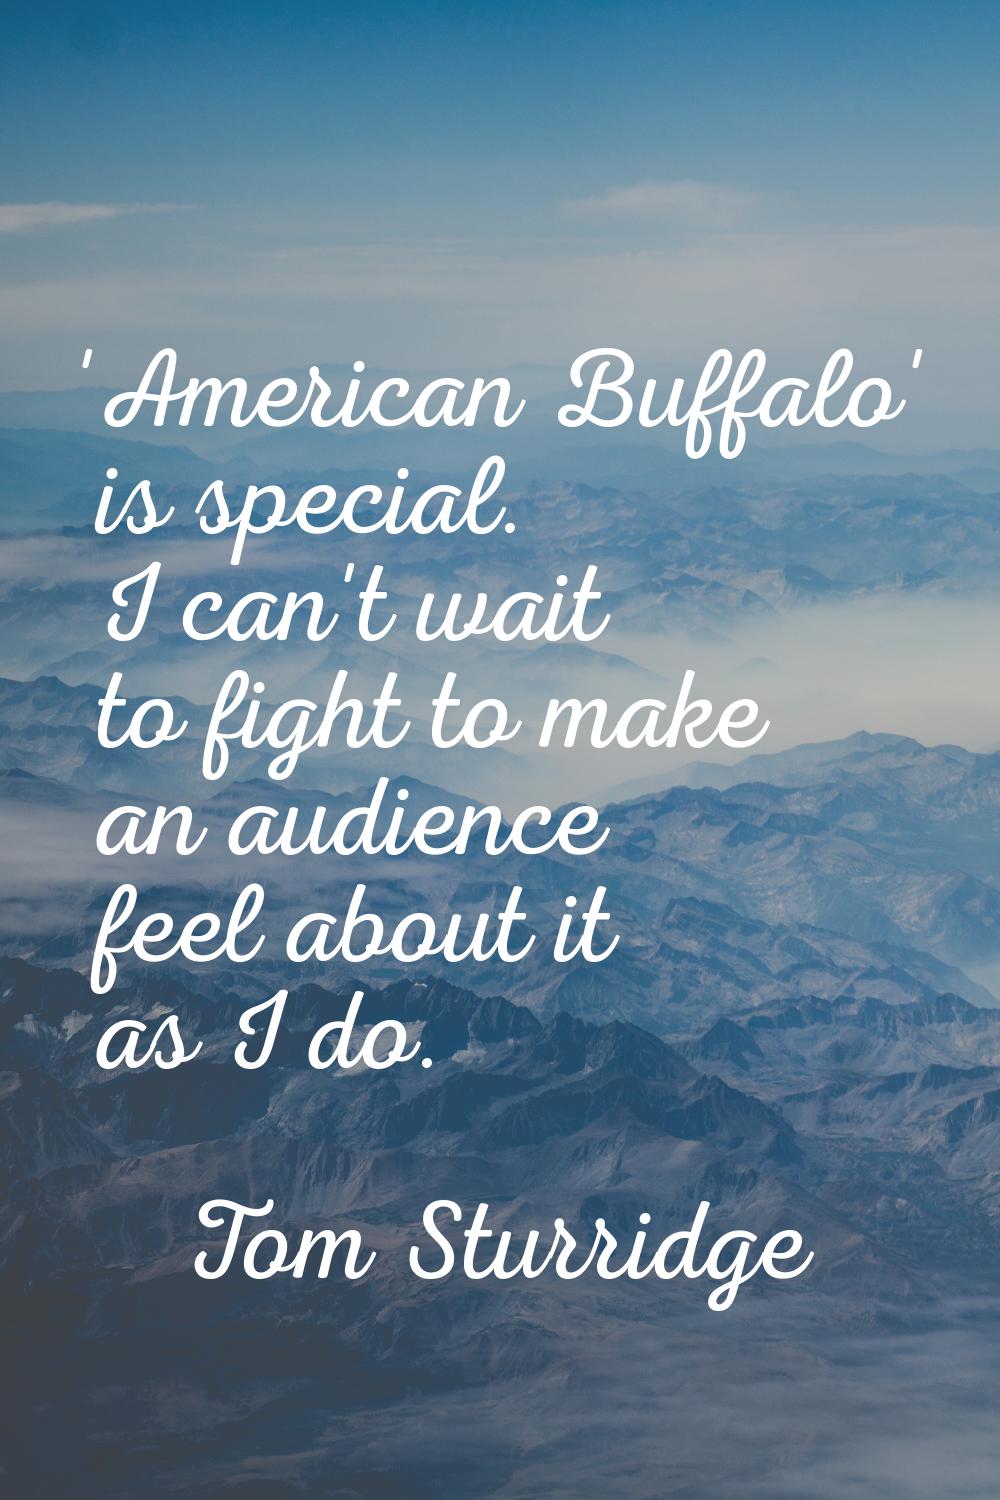 'American Buffalo' is special. I can't wait to fight to make an audience feel about it as I do.